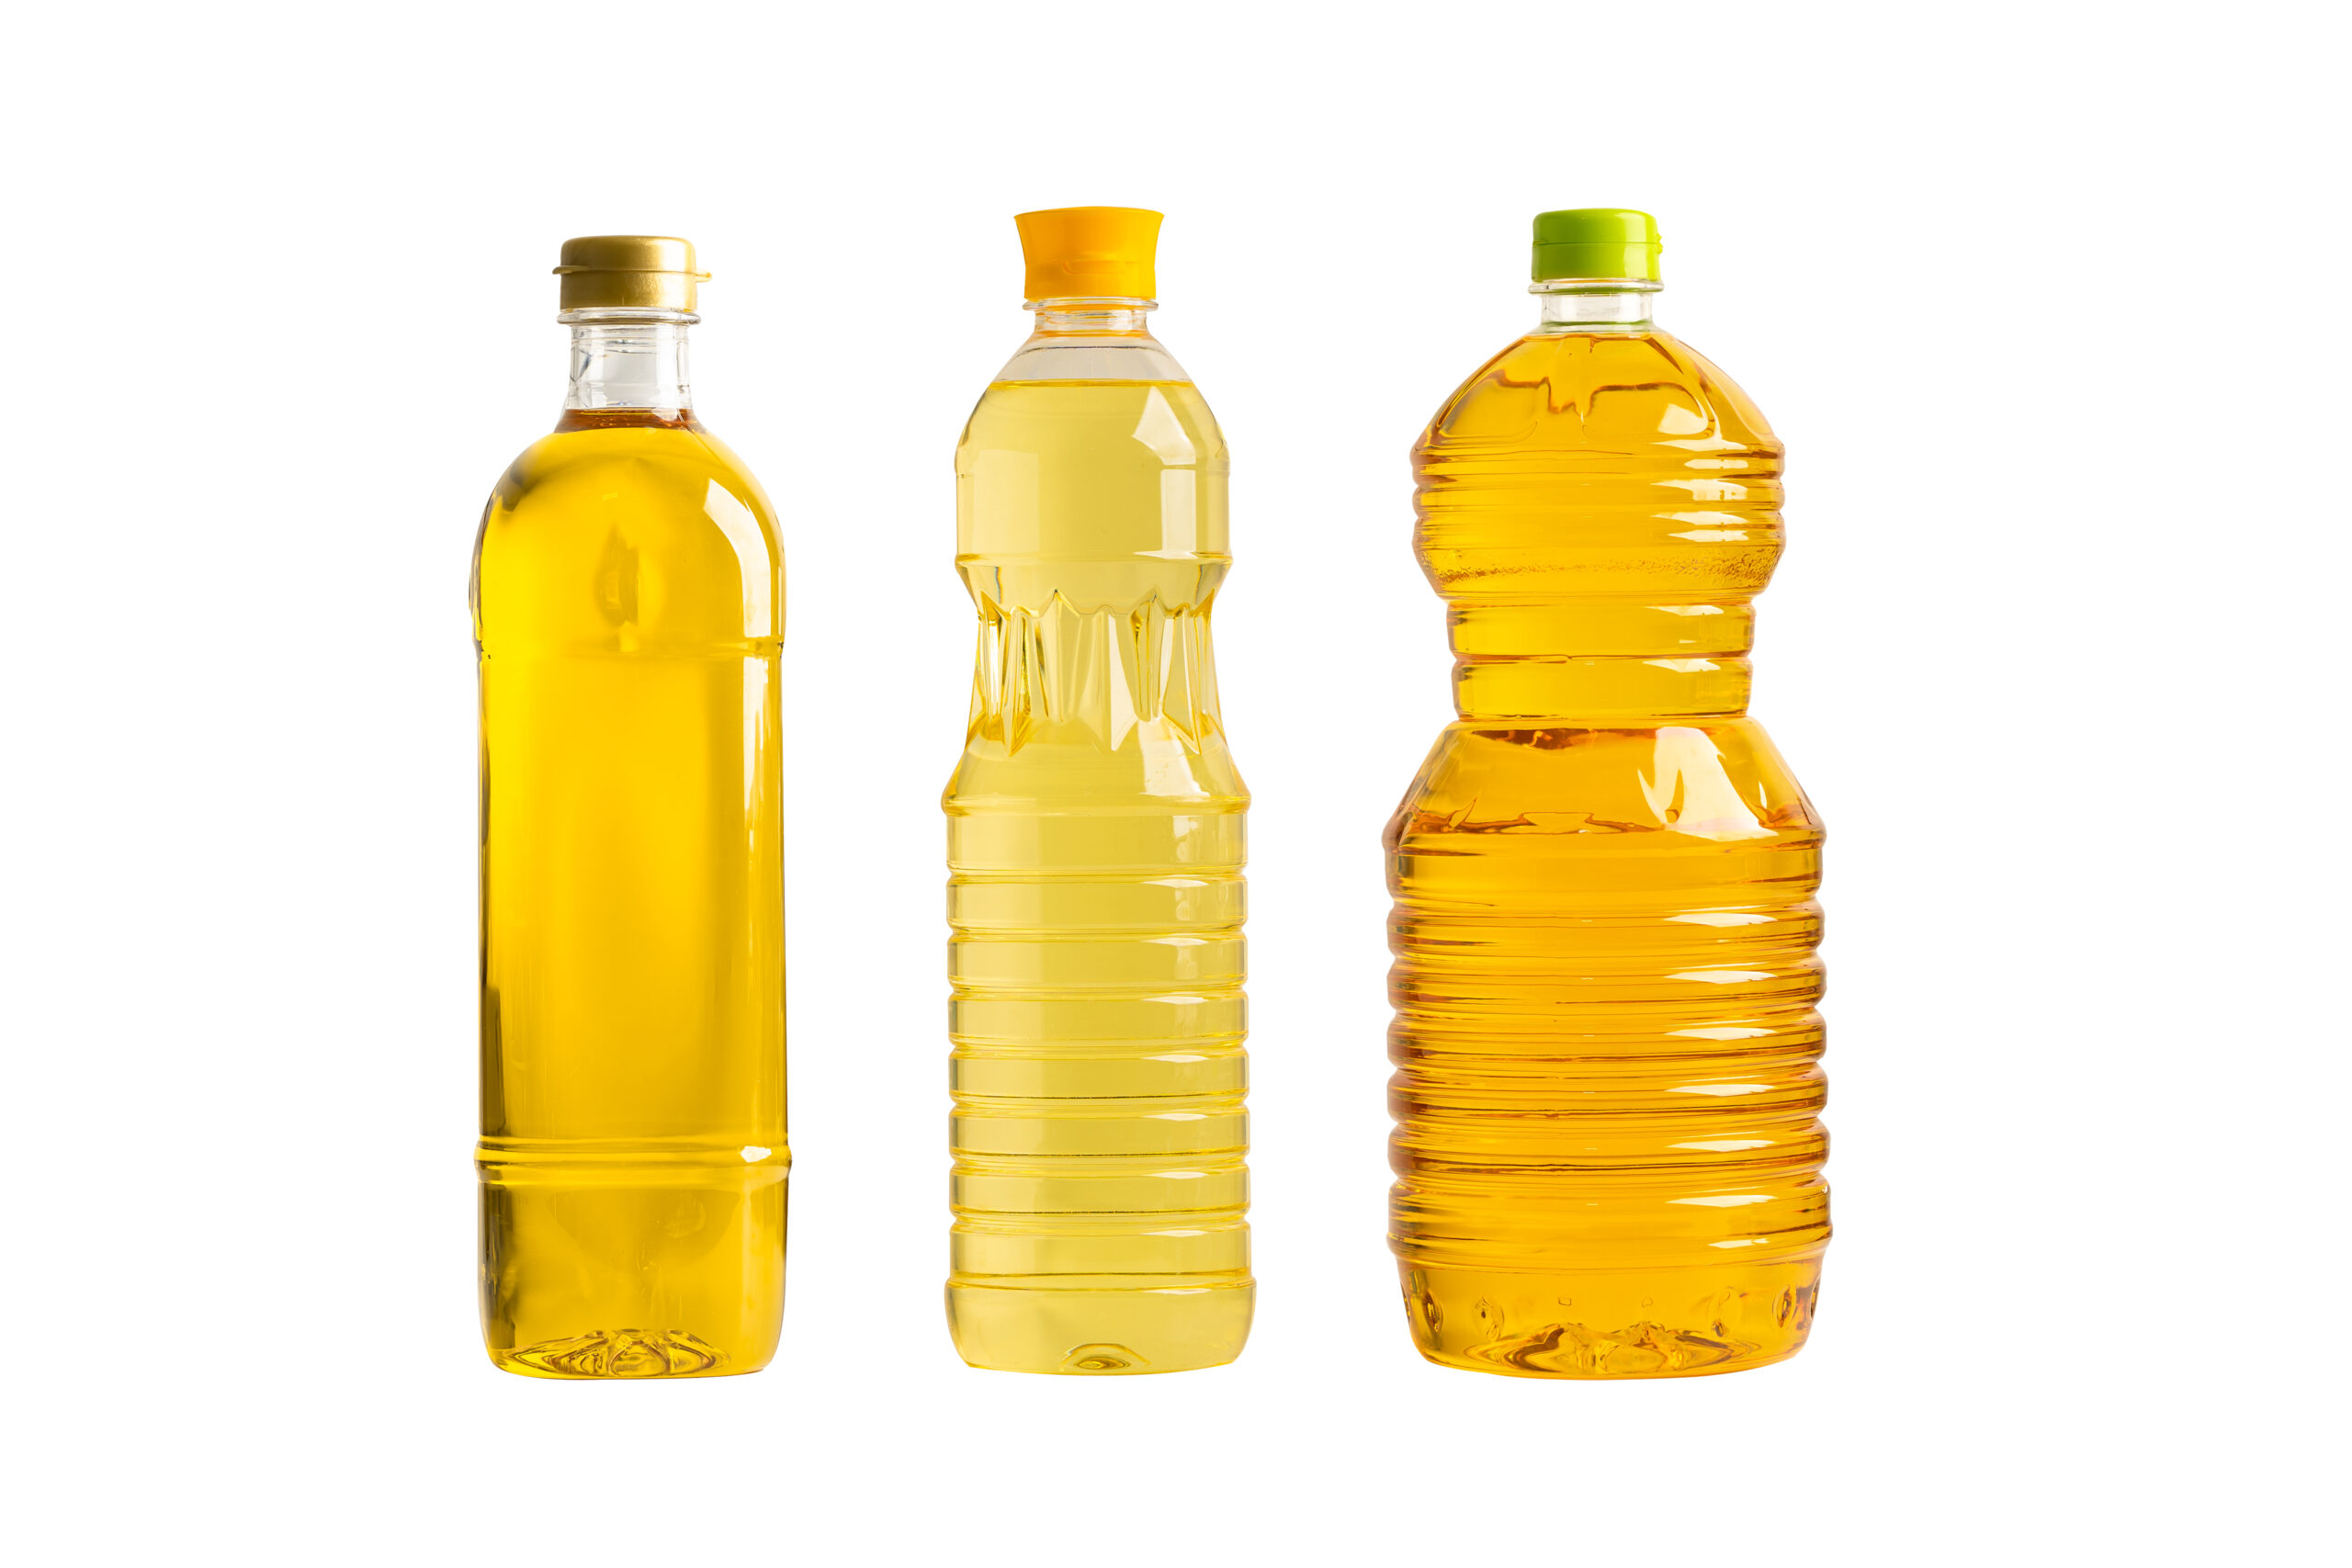 Is canola oil banned in Europe